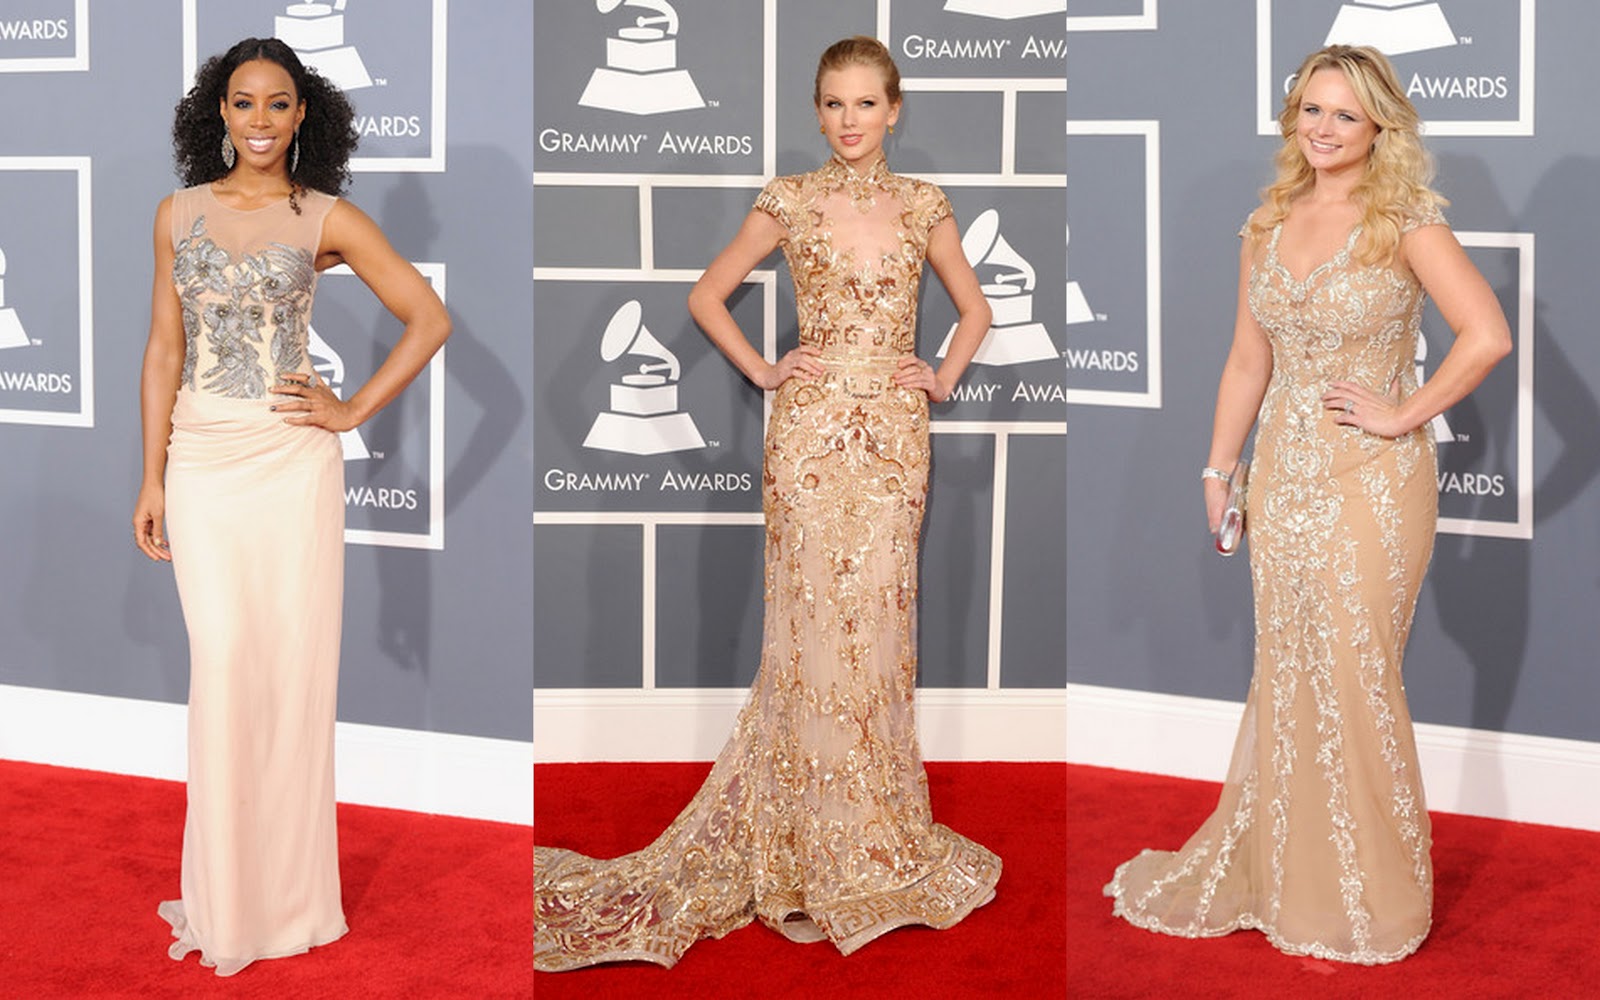 wedding dresses with lace back Divas and Darlings - The Grammy Awards 2012